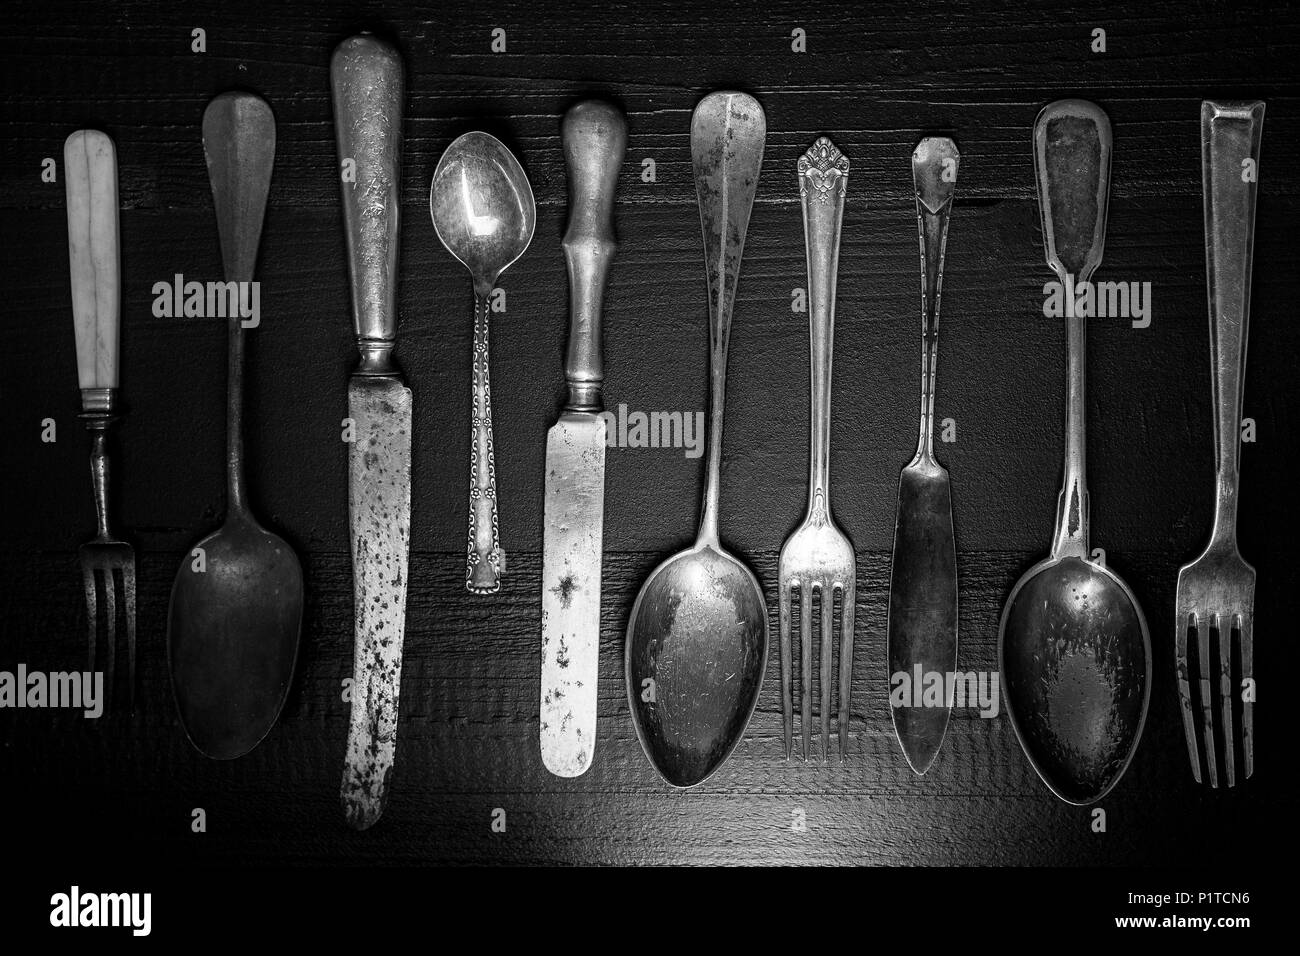 Rustic Cutlery on Old Dark Wooden Background. Silverware and Food Concept. Stock Photo